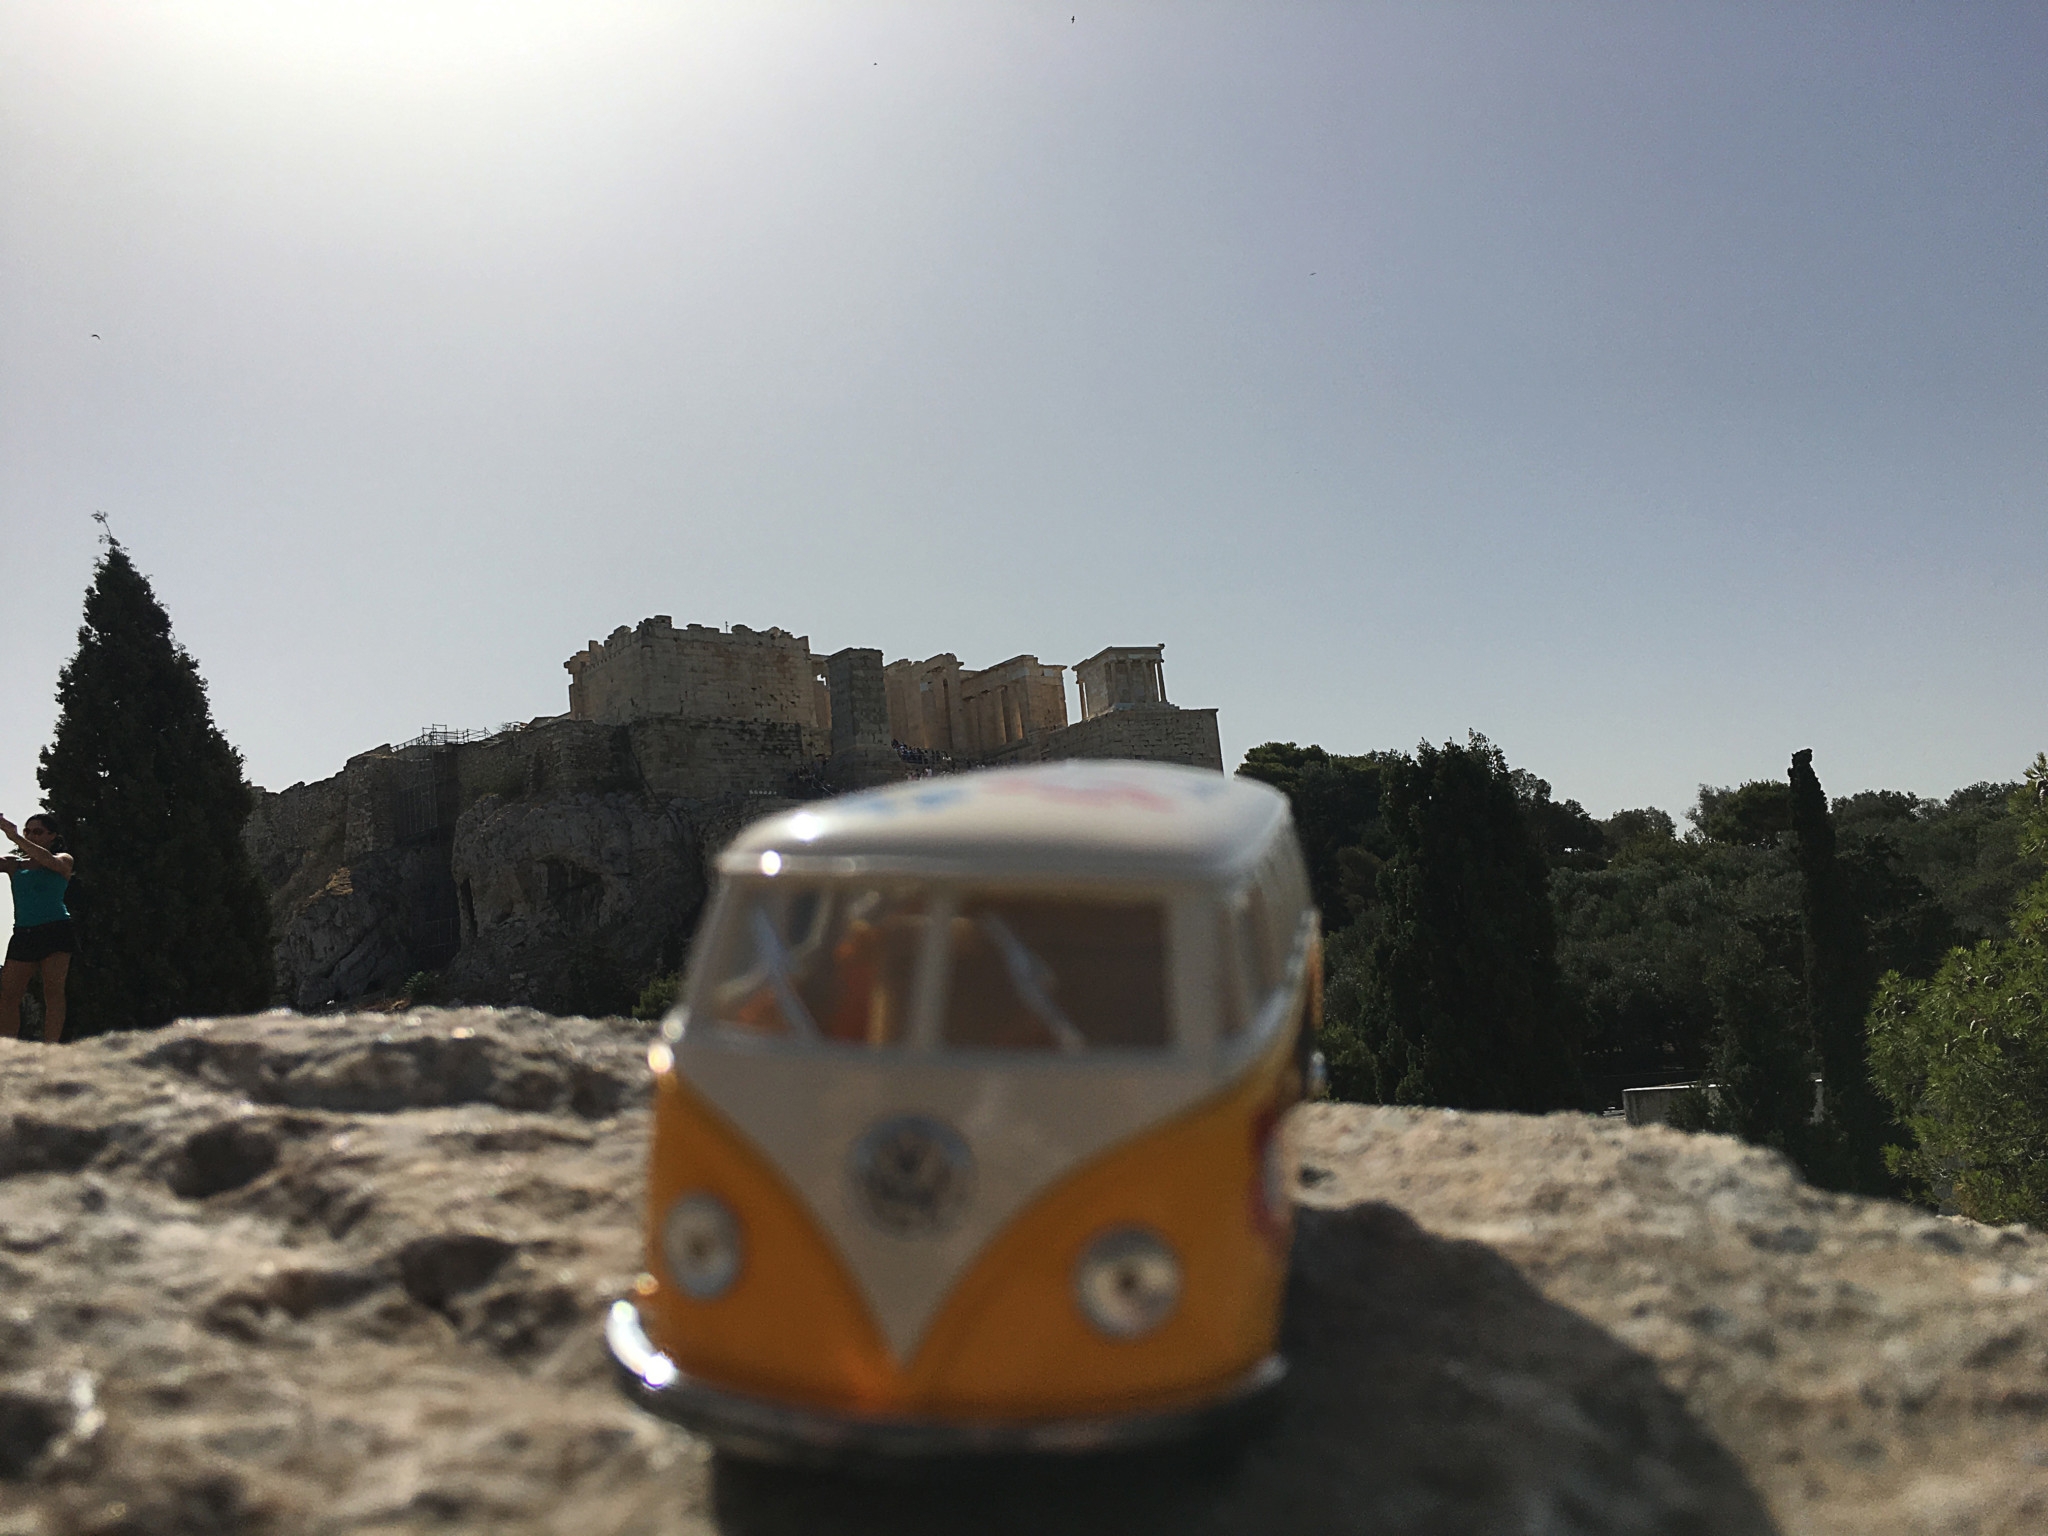 Yellow van on Mars Hill in front of the Acropolis